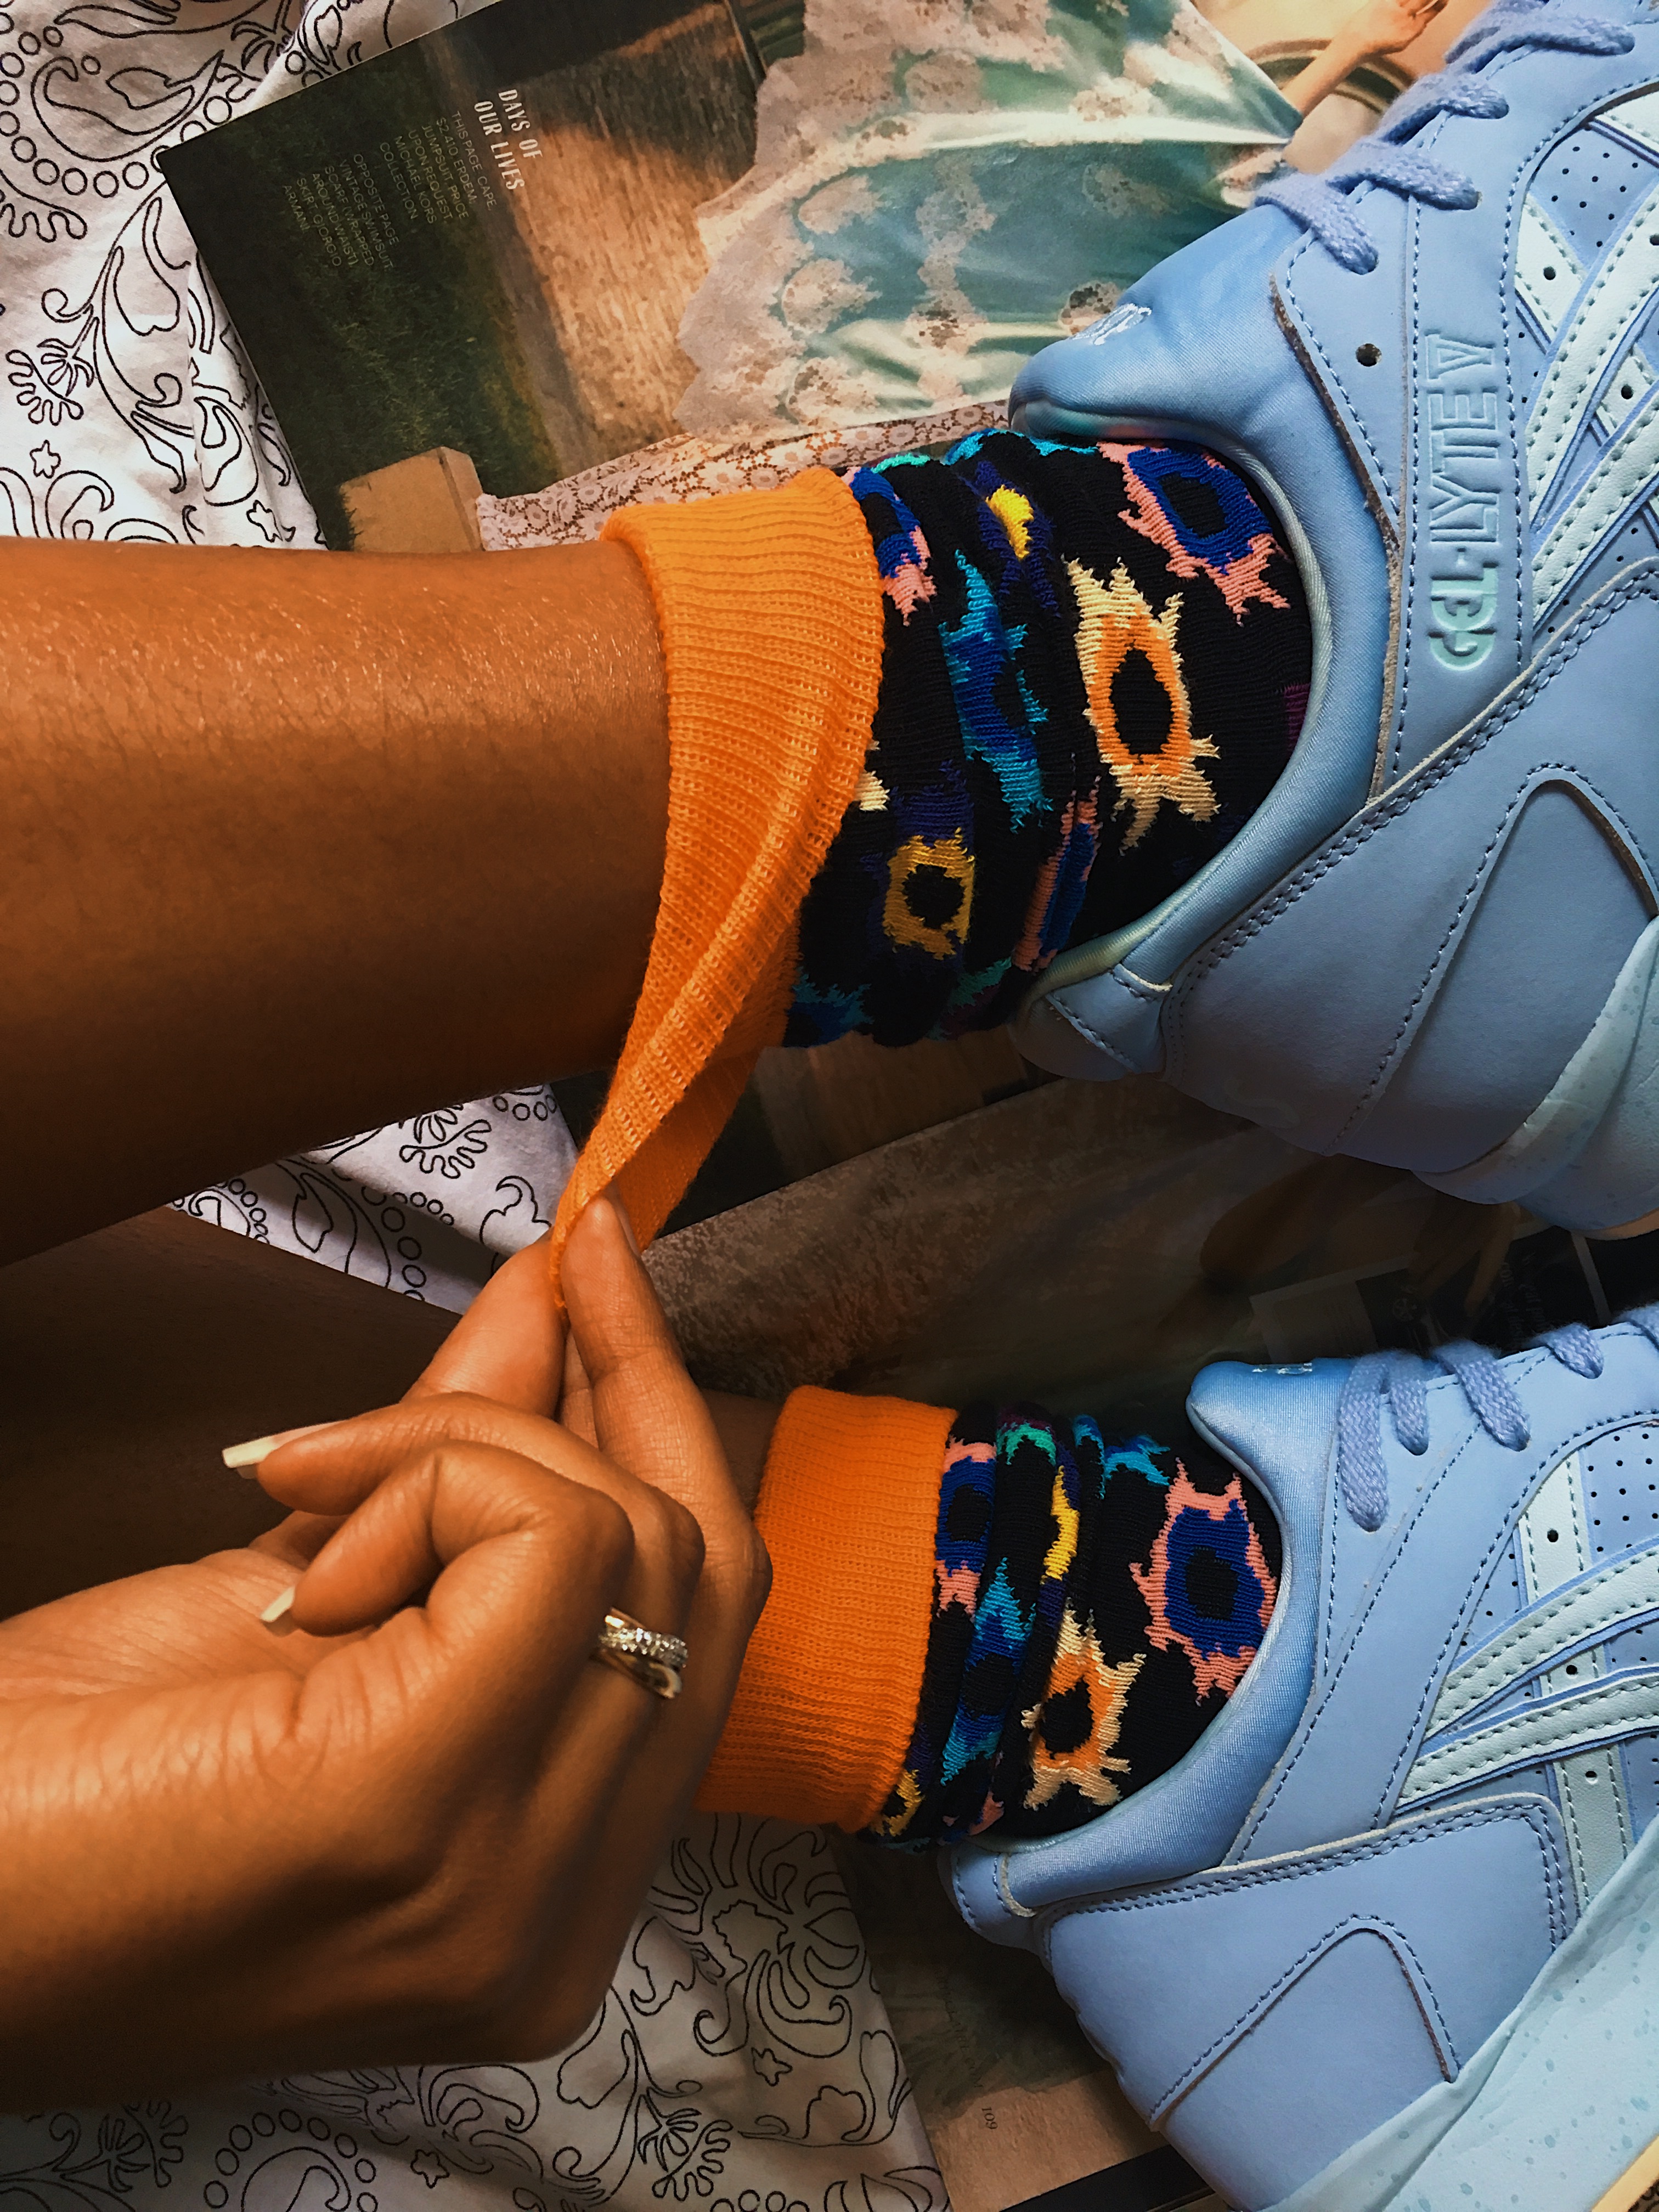 happy socks-colorful socks-asics tiger-gel lyte v-wear who you are-blue sneakers-lcm